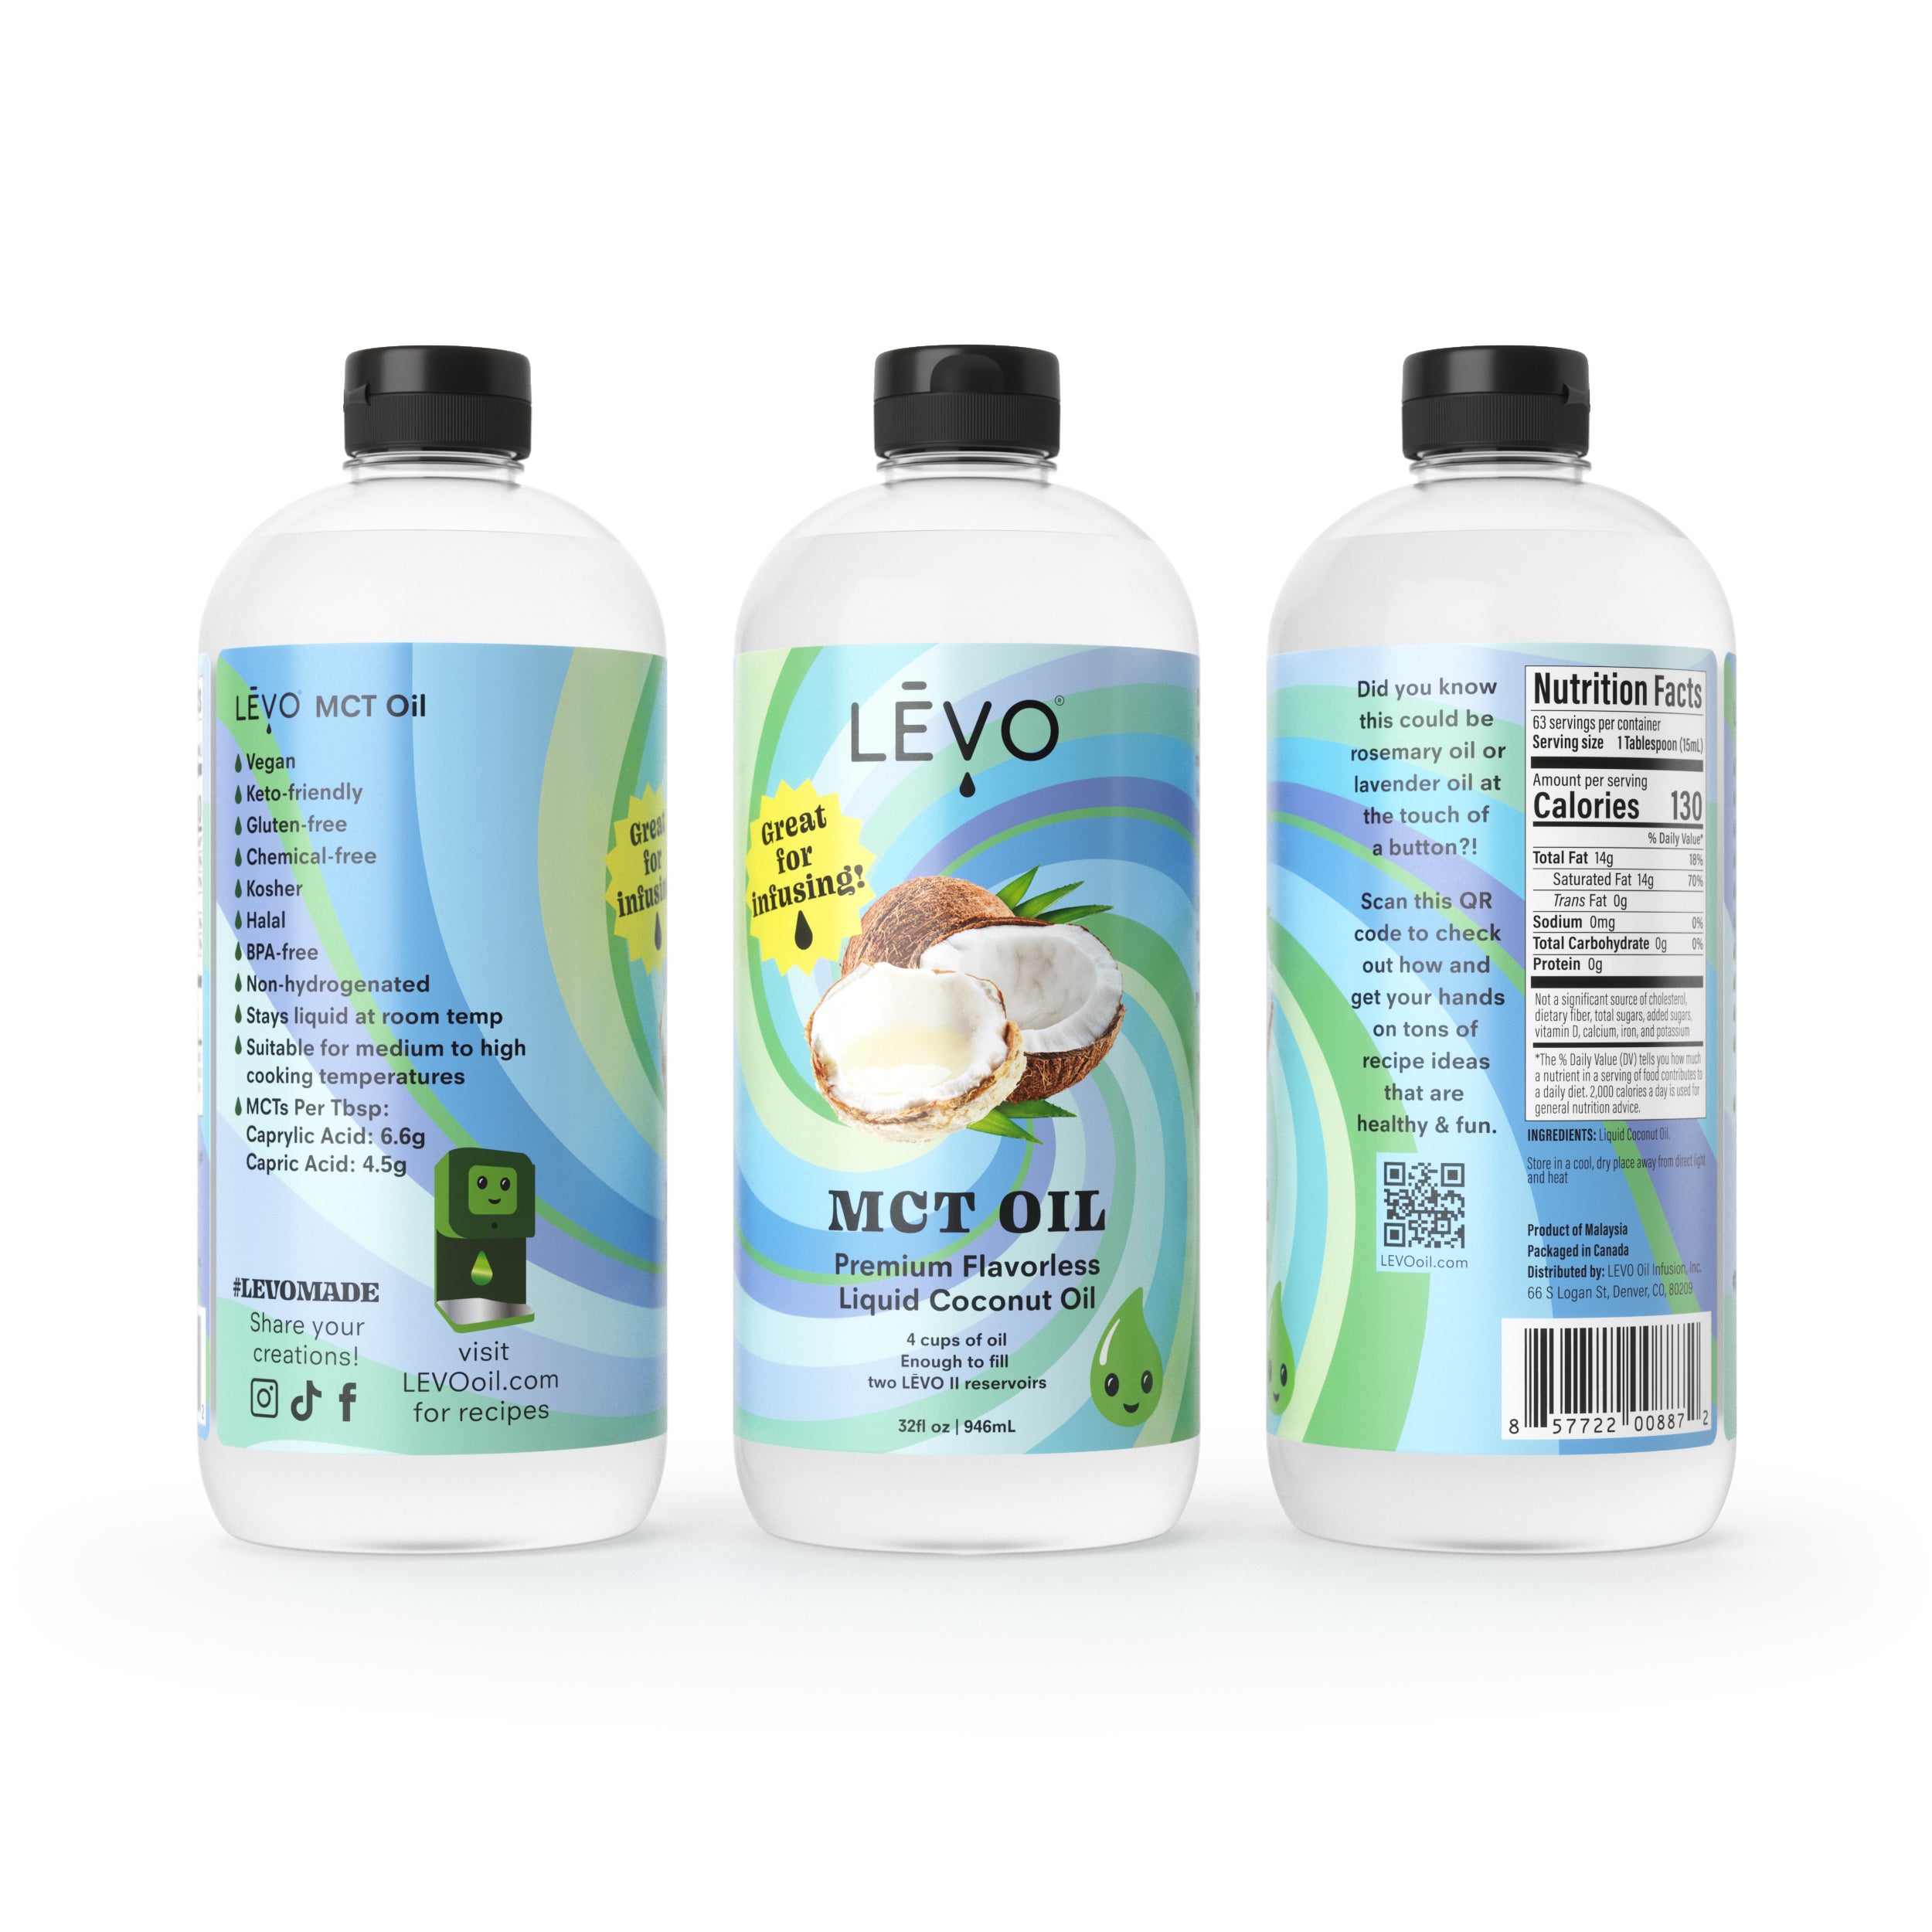 LEVO MCT oil 32oz front and back of bottle